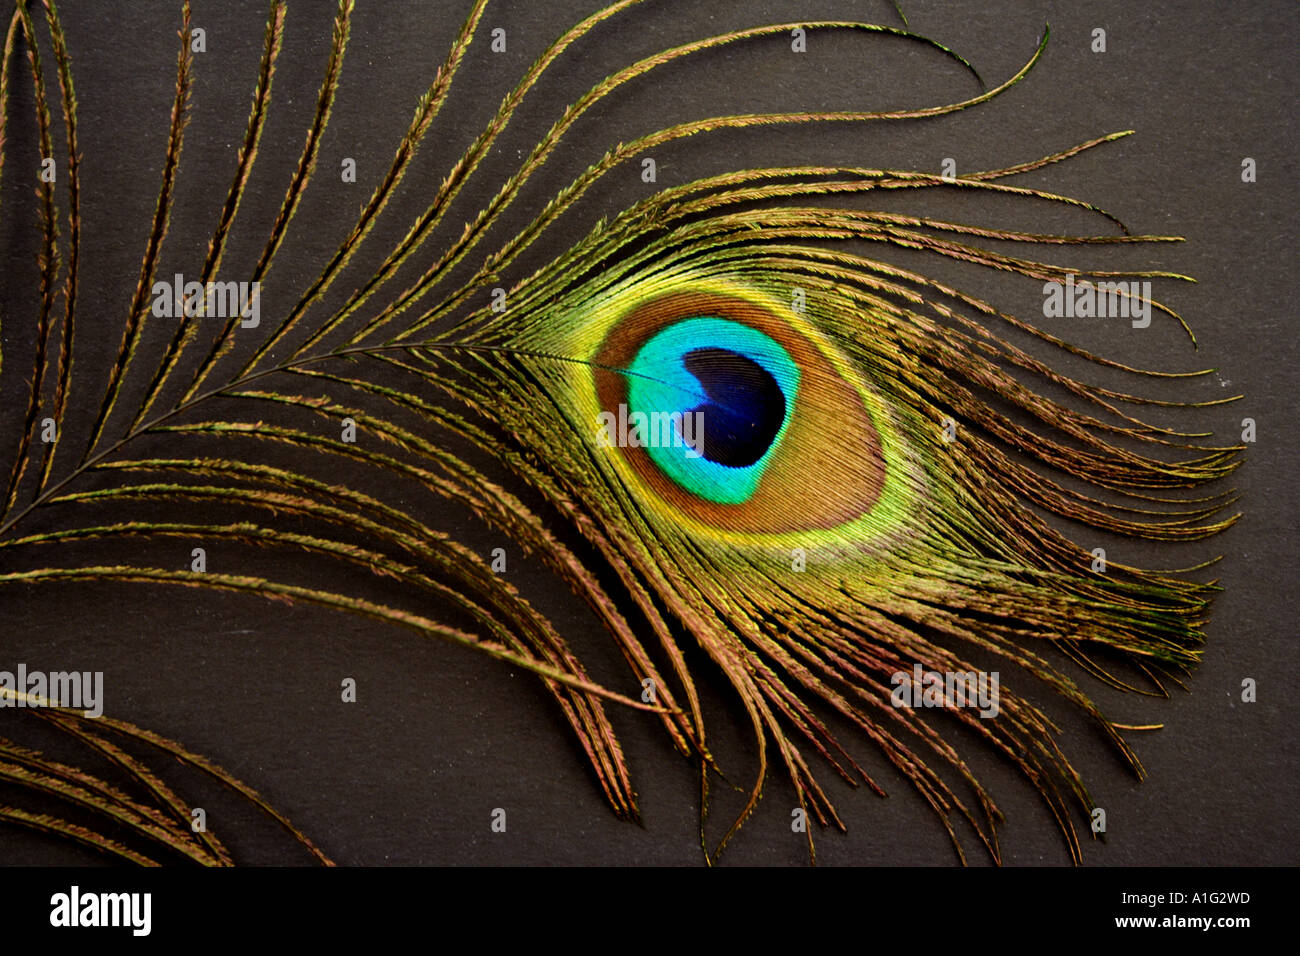 CLOSE UP OF THE EYE OF A PEACOCK FEATHER BLACK BACKGROUND Stock Photo -  Alamy